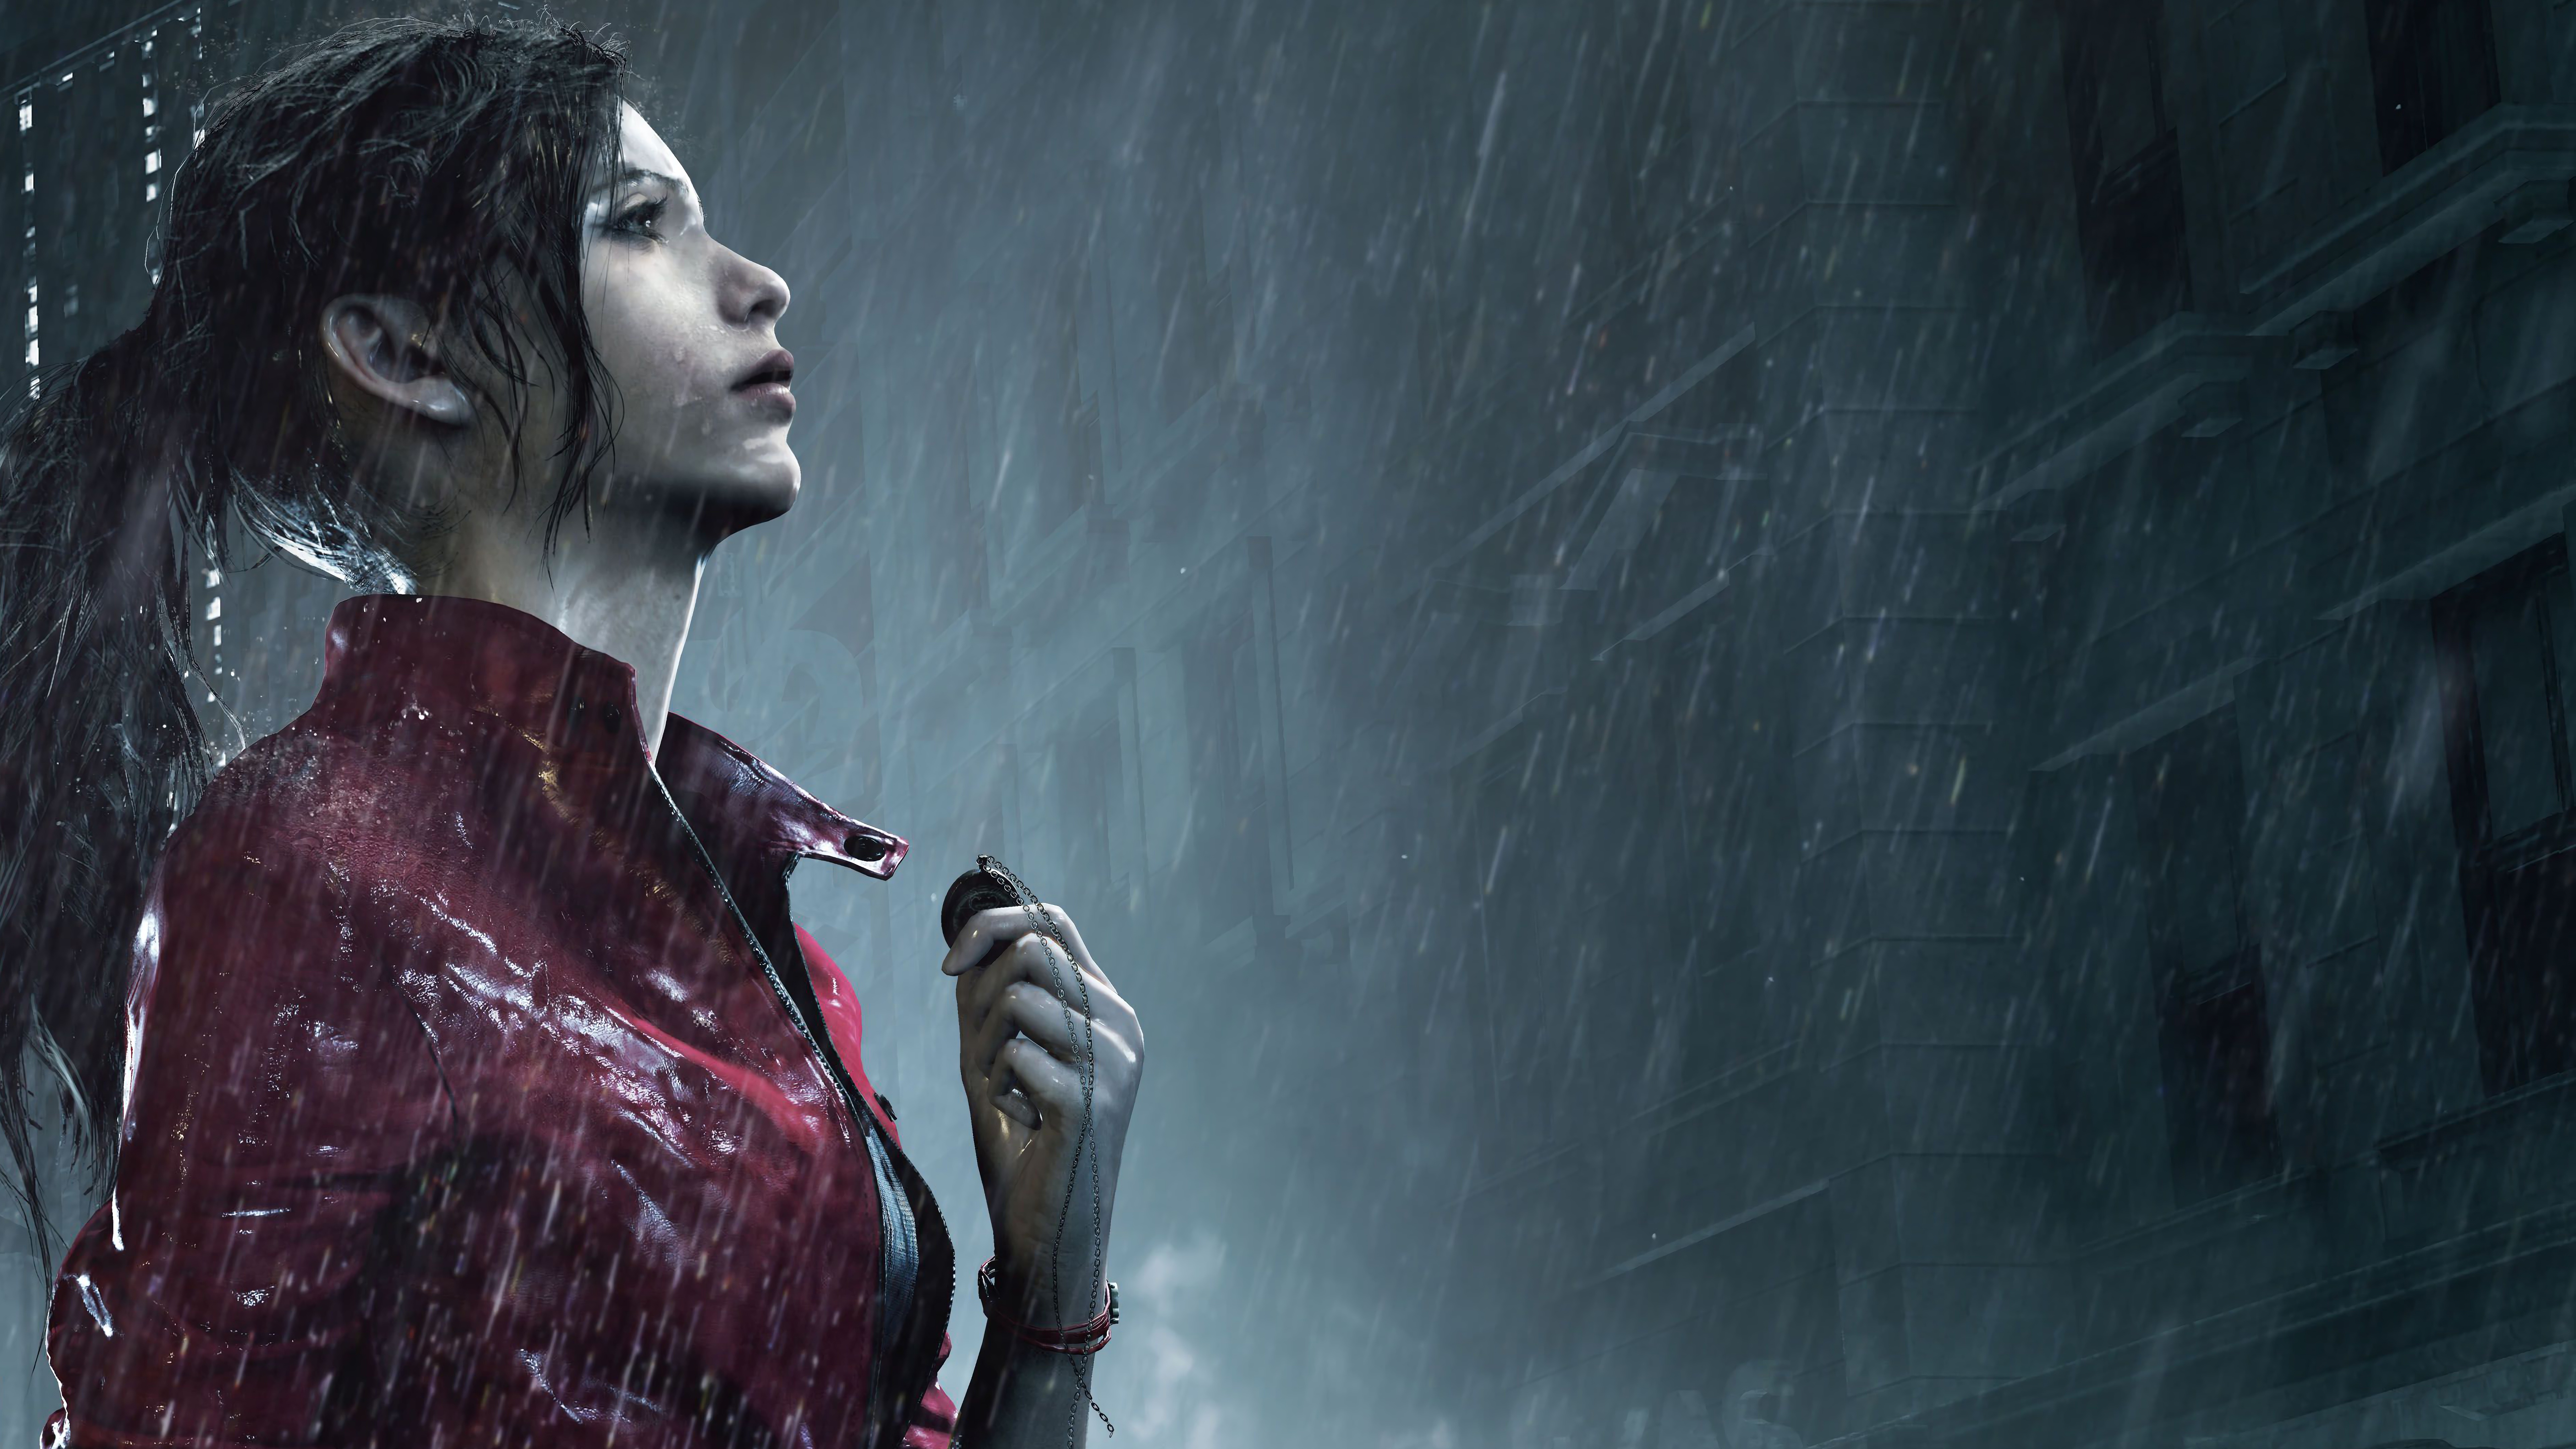 General 7680x4320 Resident Evil 2 Remake Resident Evil video games dark hair Video Game Heroes rain video game girls video game characters Capcom Claire Redfield